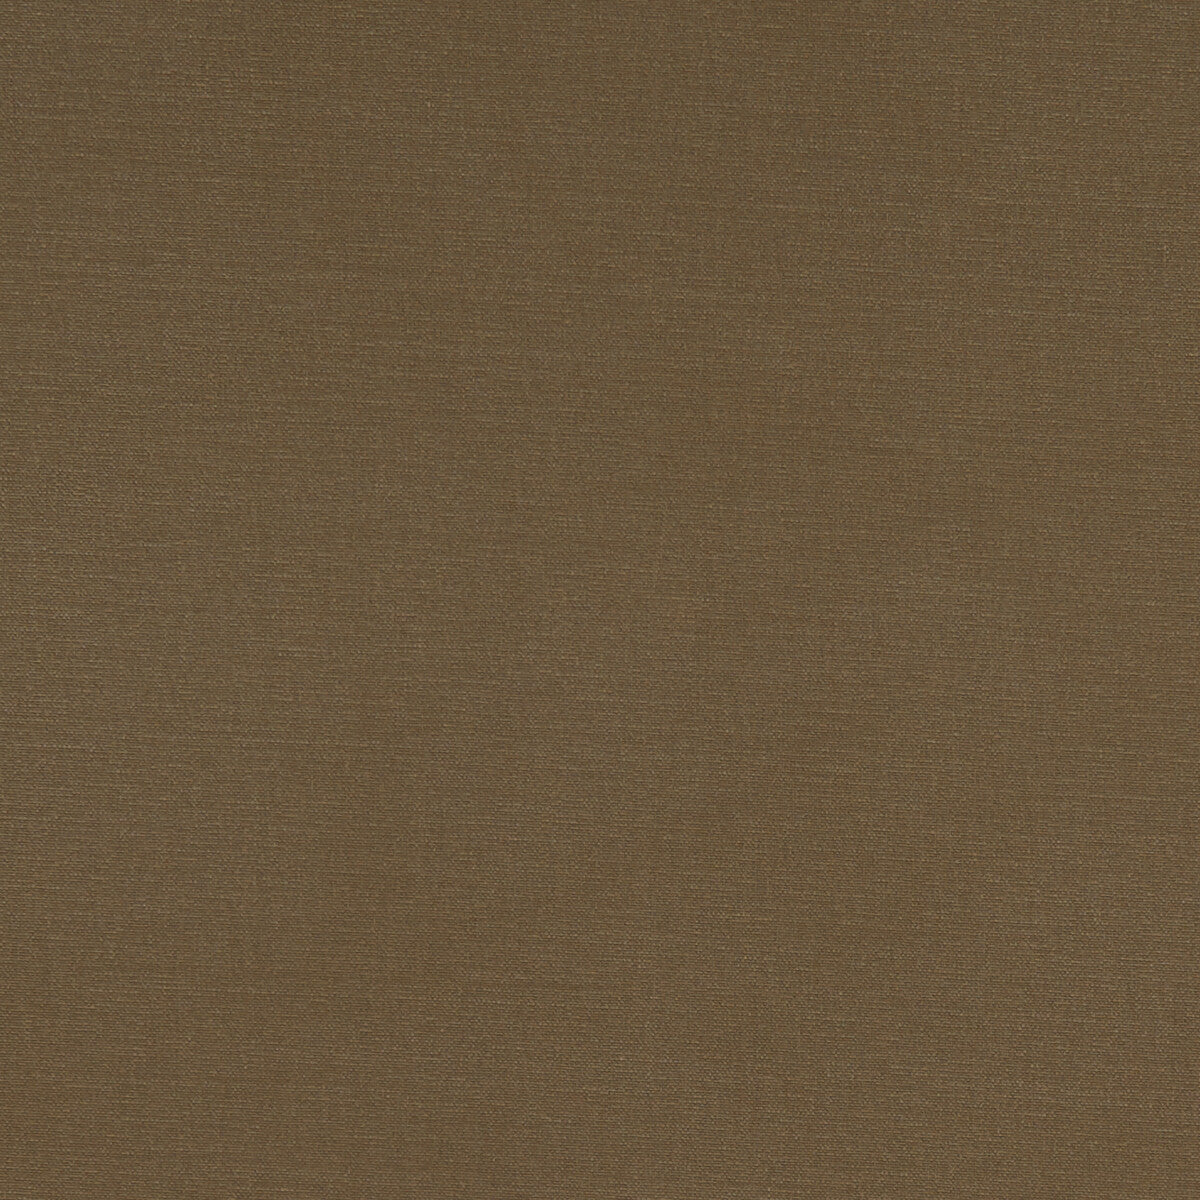 Alora fabric in cocoa color - pattern F1097/11.CAC.0 - by Clarke And Clarke in the Alora By Studio G For C&amp;C collection